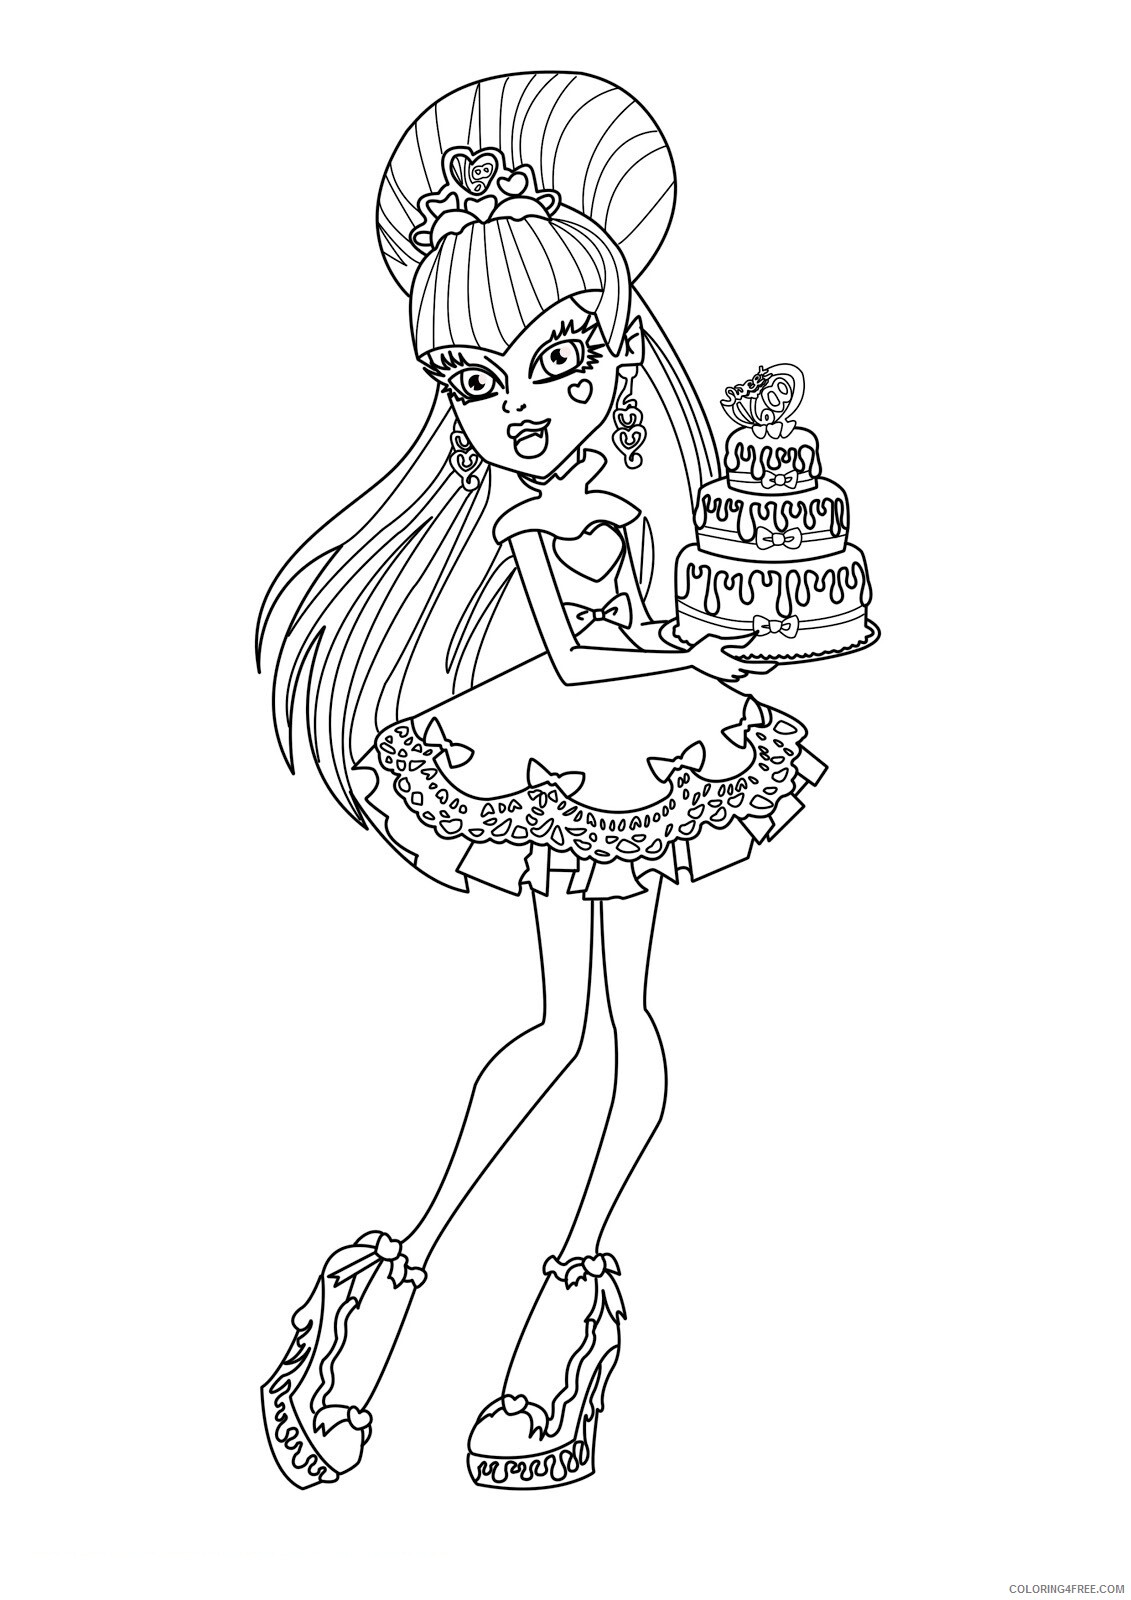 Monster High Coloring Pages Monster High Image Printable 2021 4192 Coloring4free